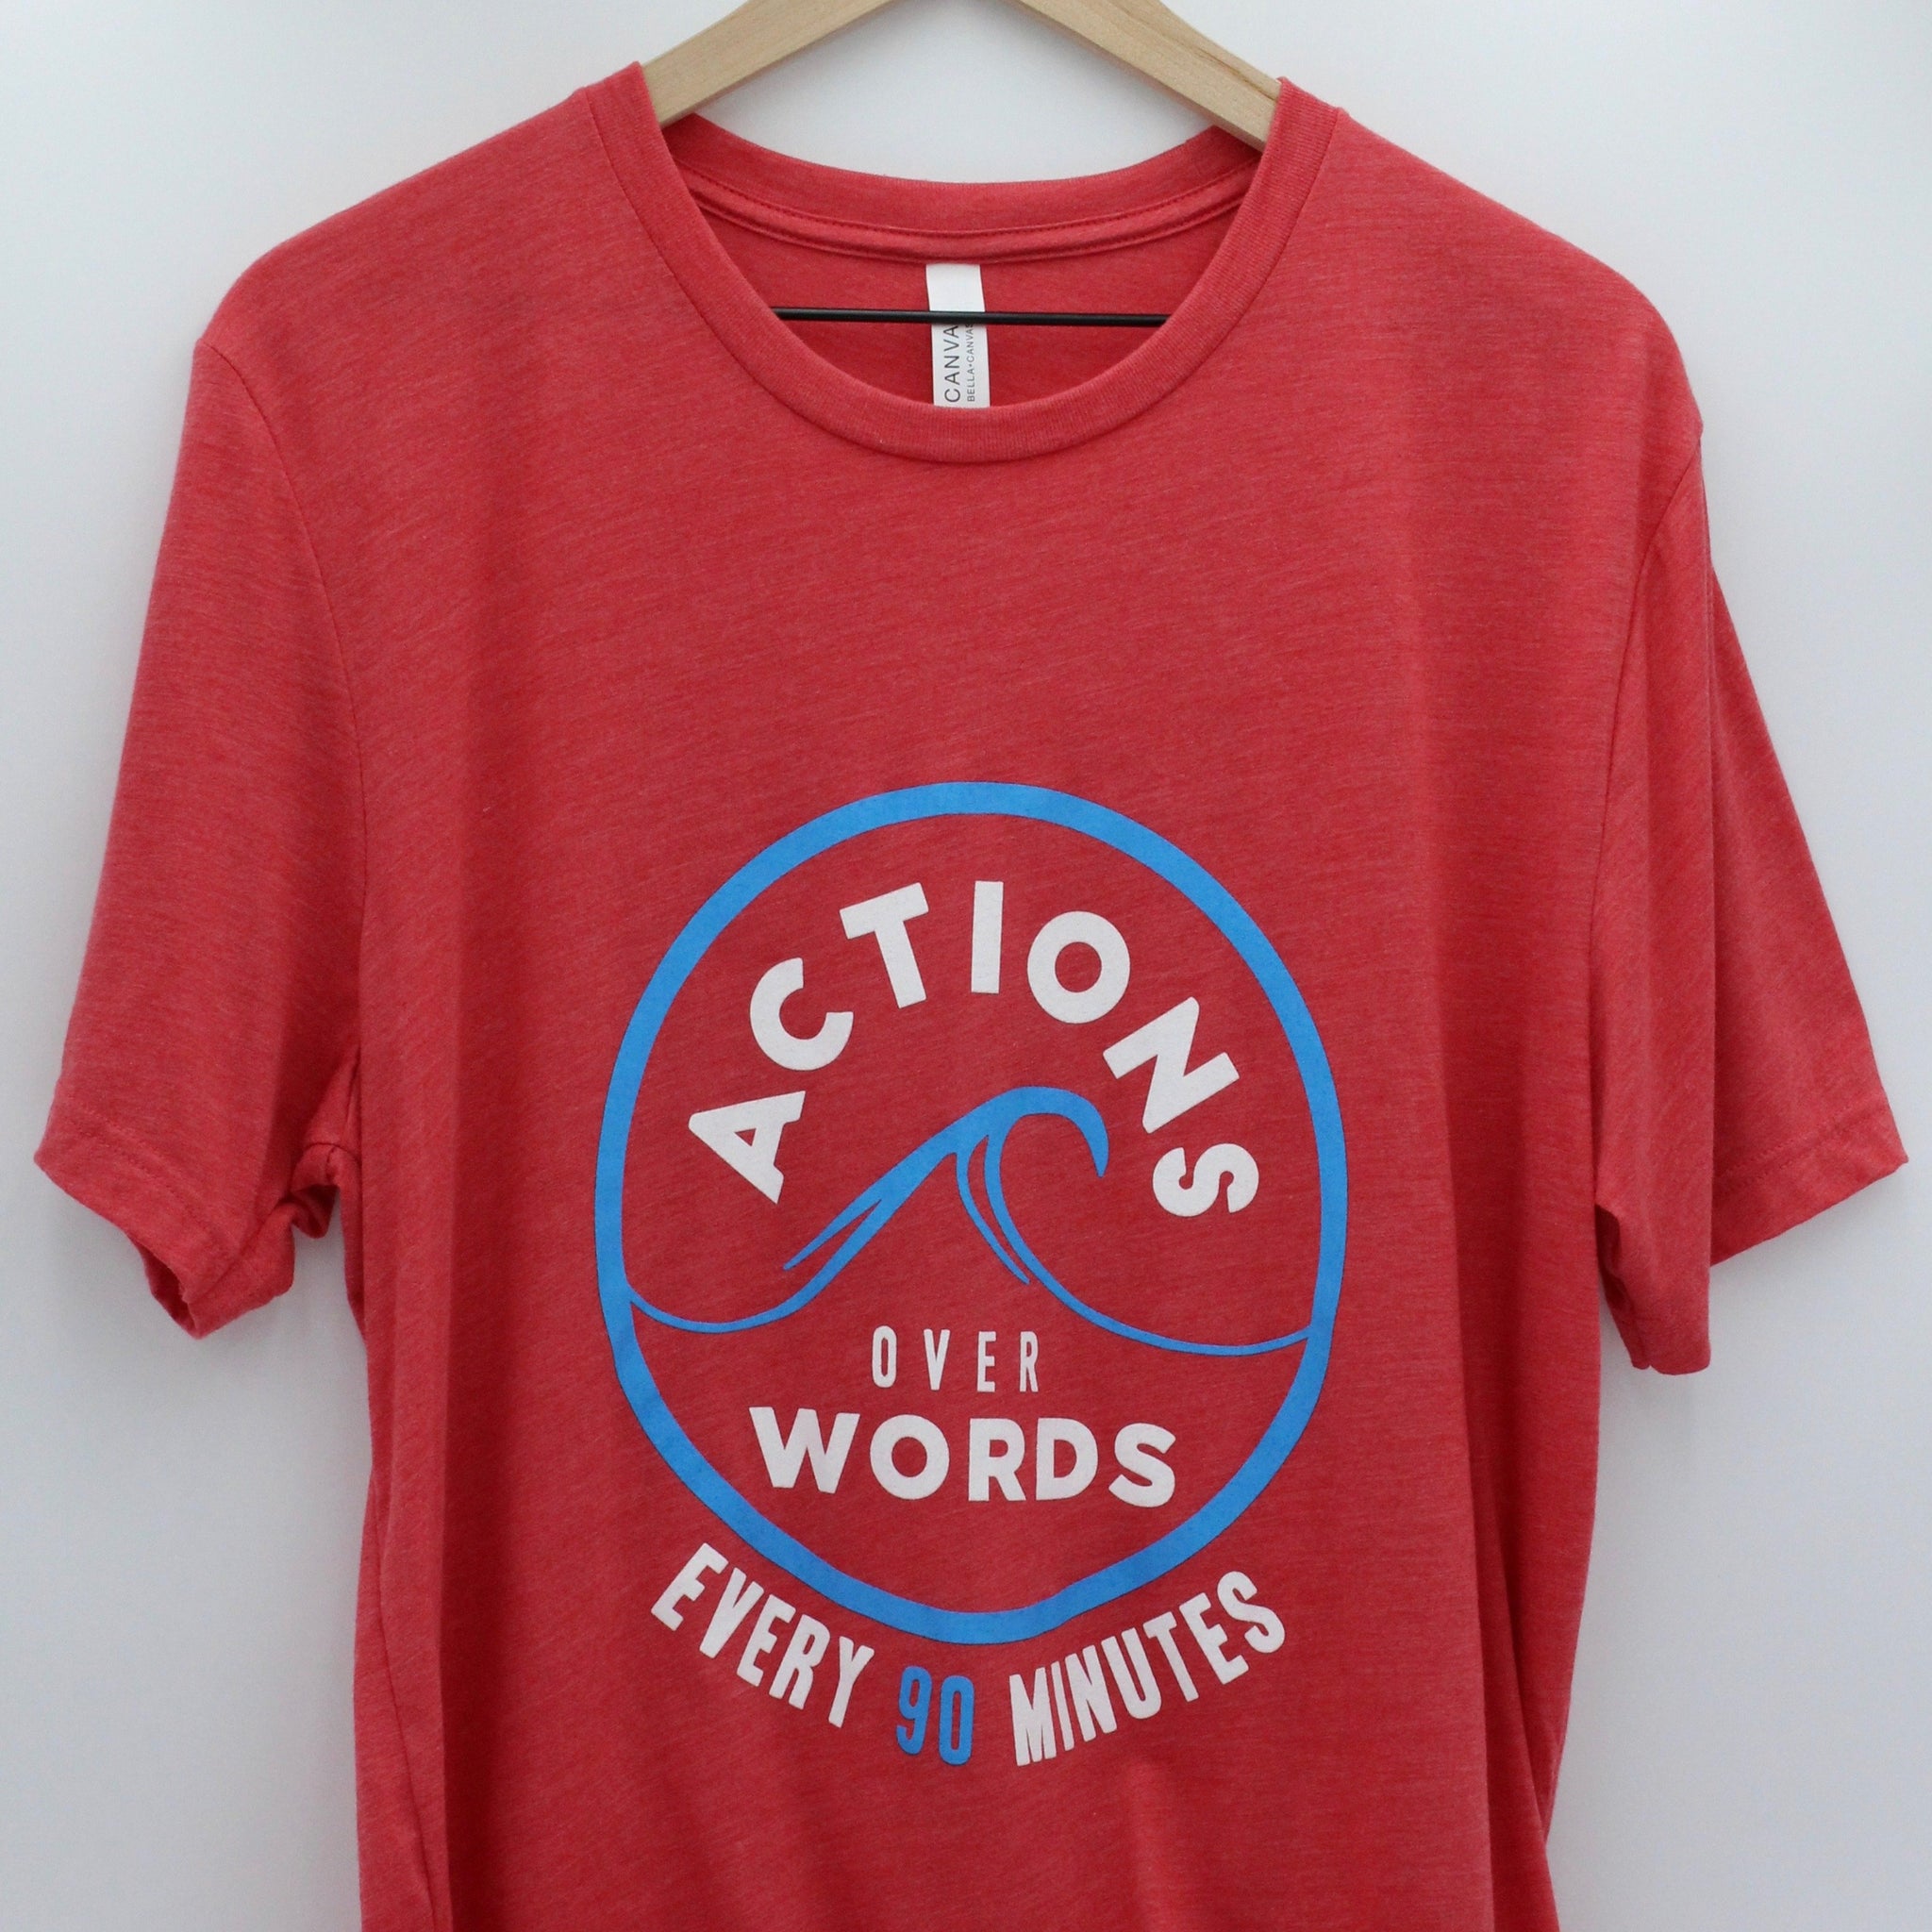 Every 90 Minutes ~ ALS Tee